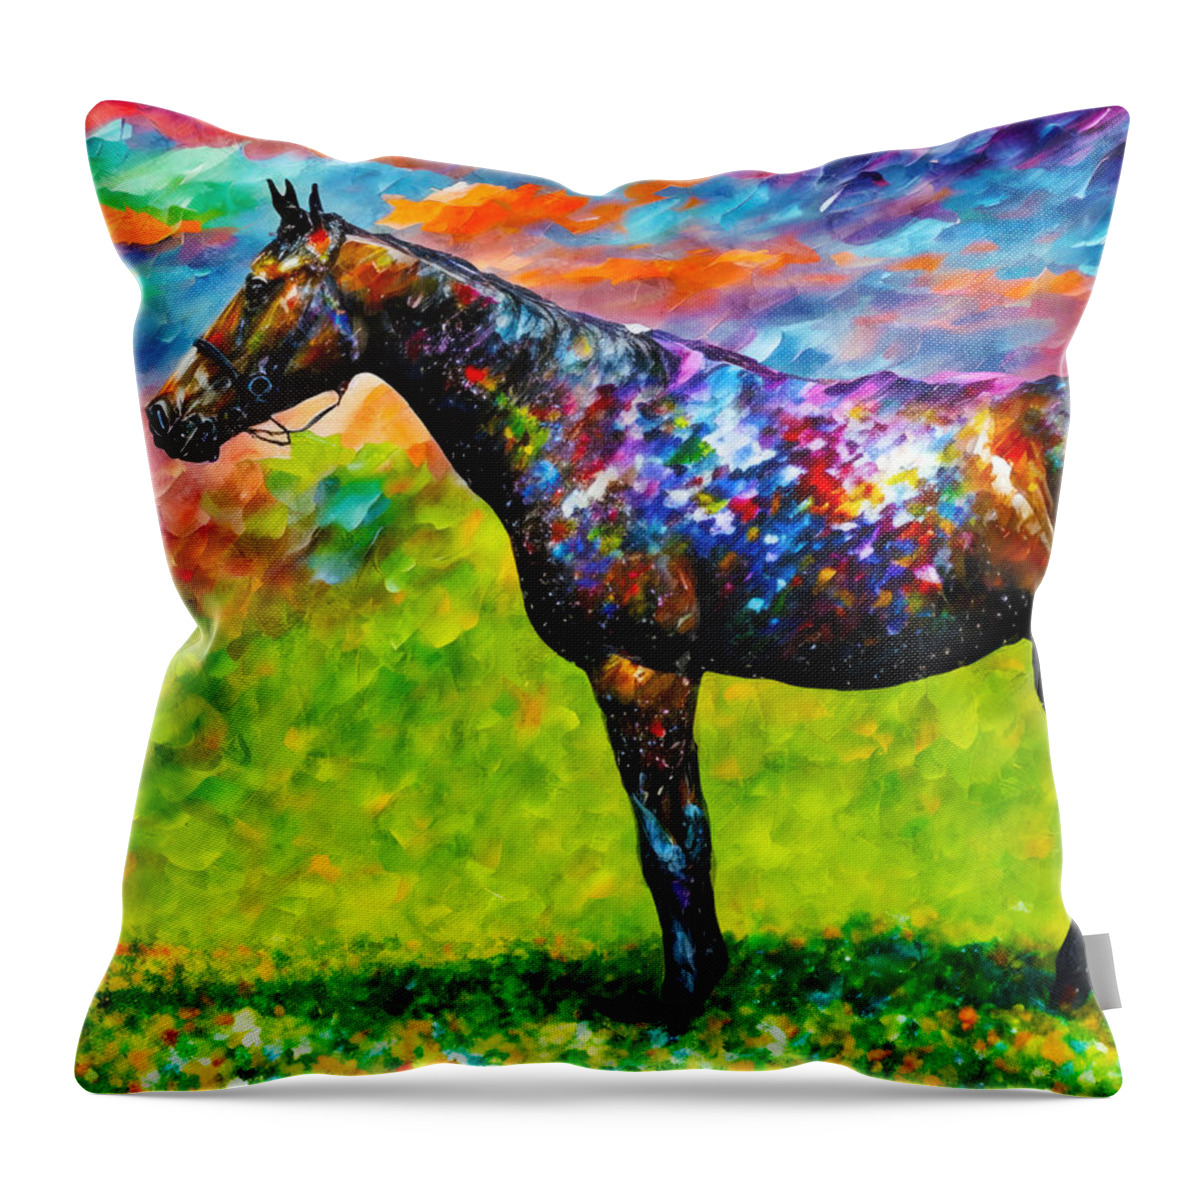 Thoroughbred Throw Pillow featuring the digital art Thoroughbred horse on a pasture - colorful abstract painting by Nicko Prints